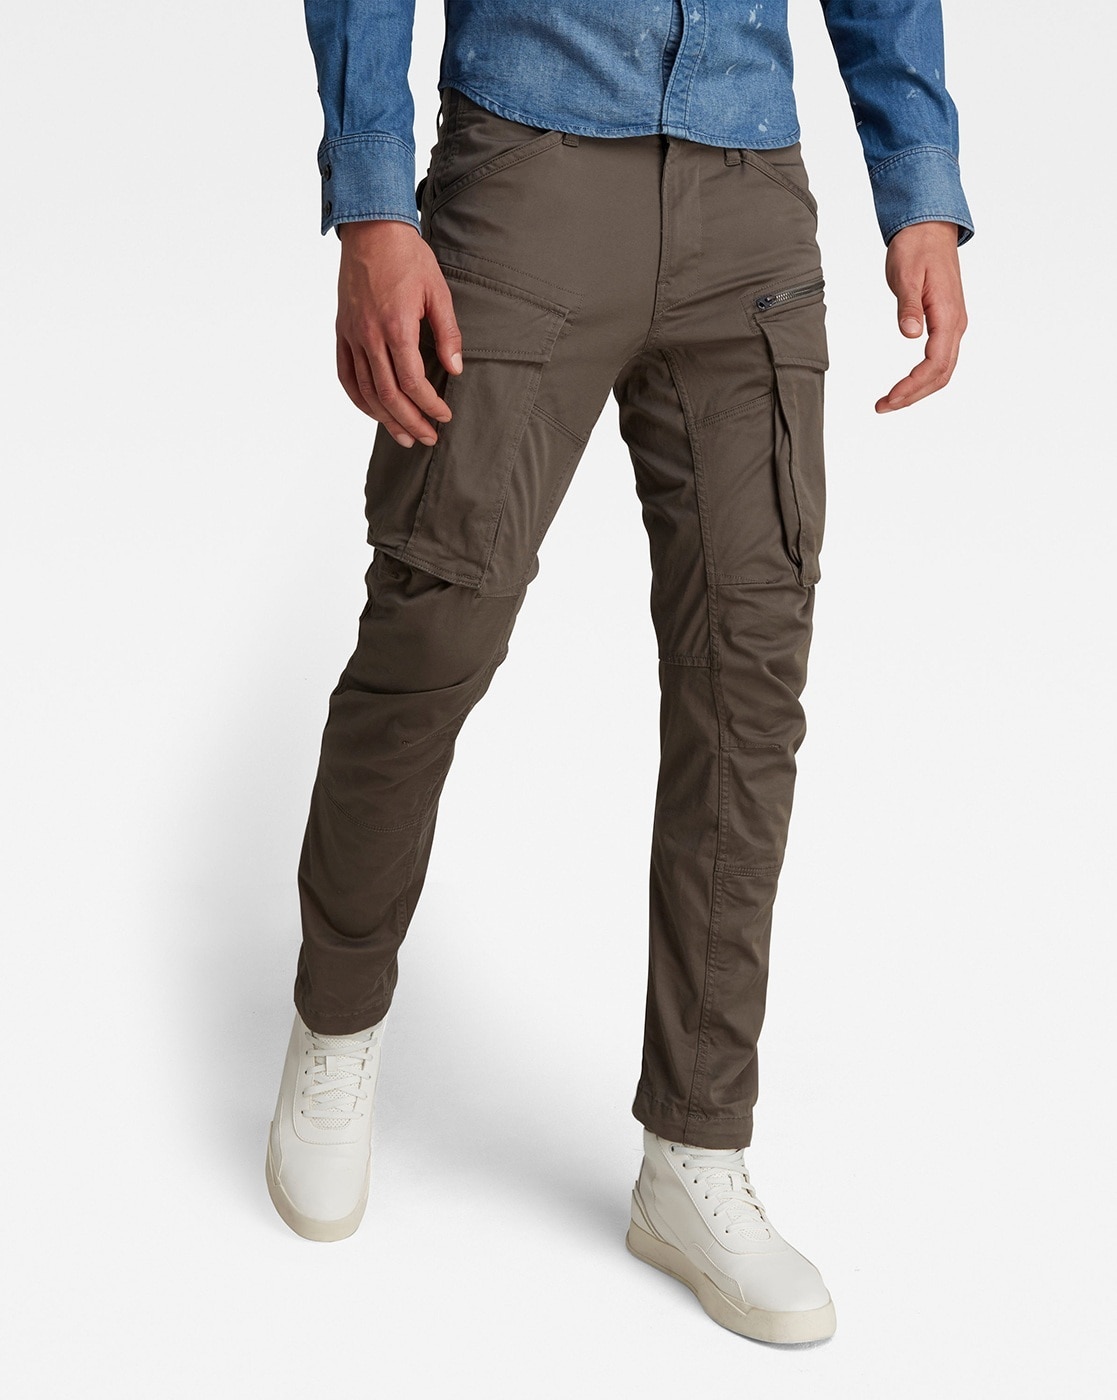 GStar RAW Pants Slacks and Chinos for Men  Online Sale up to 53 off   Lyst